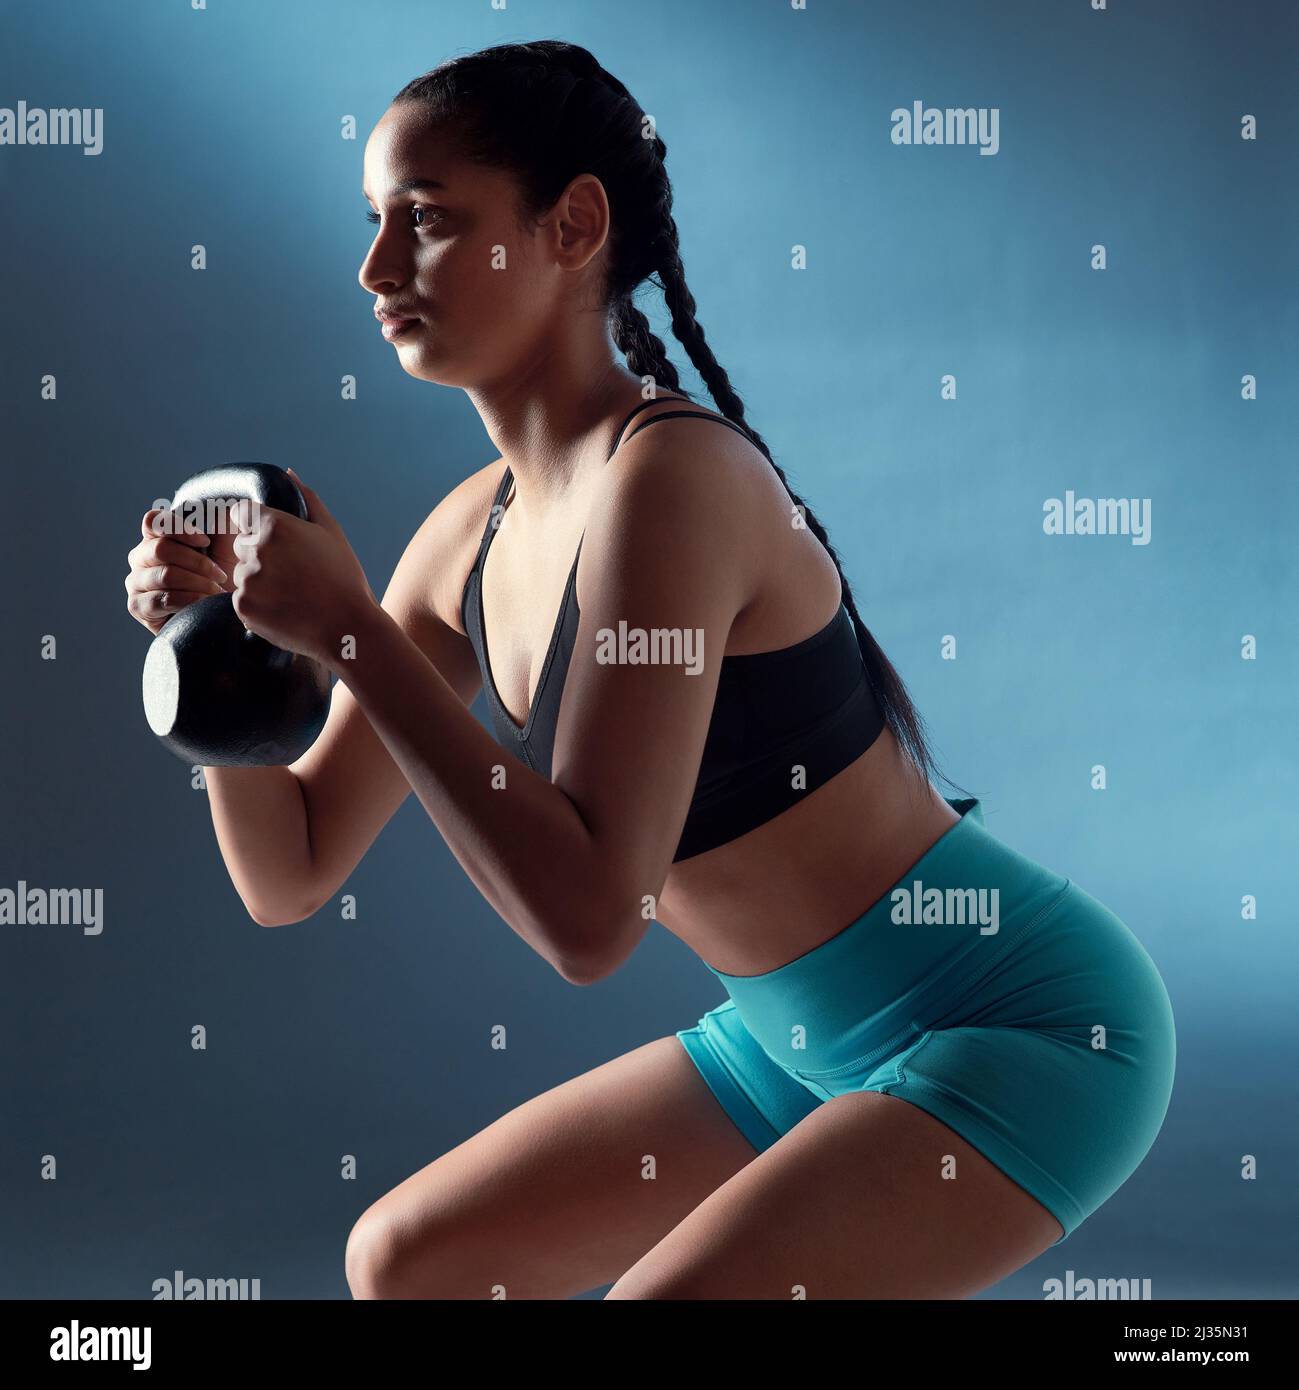 Doing sport. Young active fit woman with long legs listening to music and  doing sport Stock Photo - Alamy